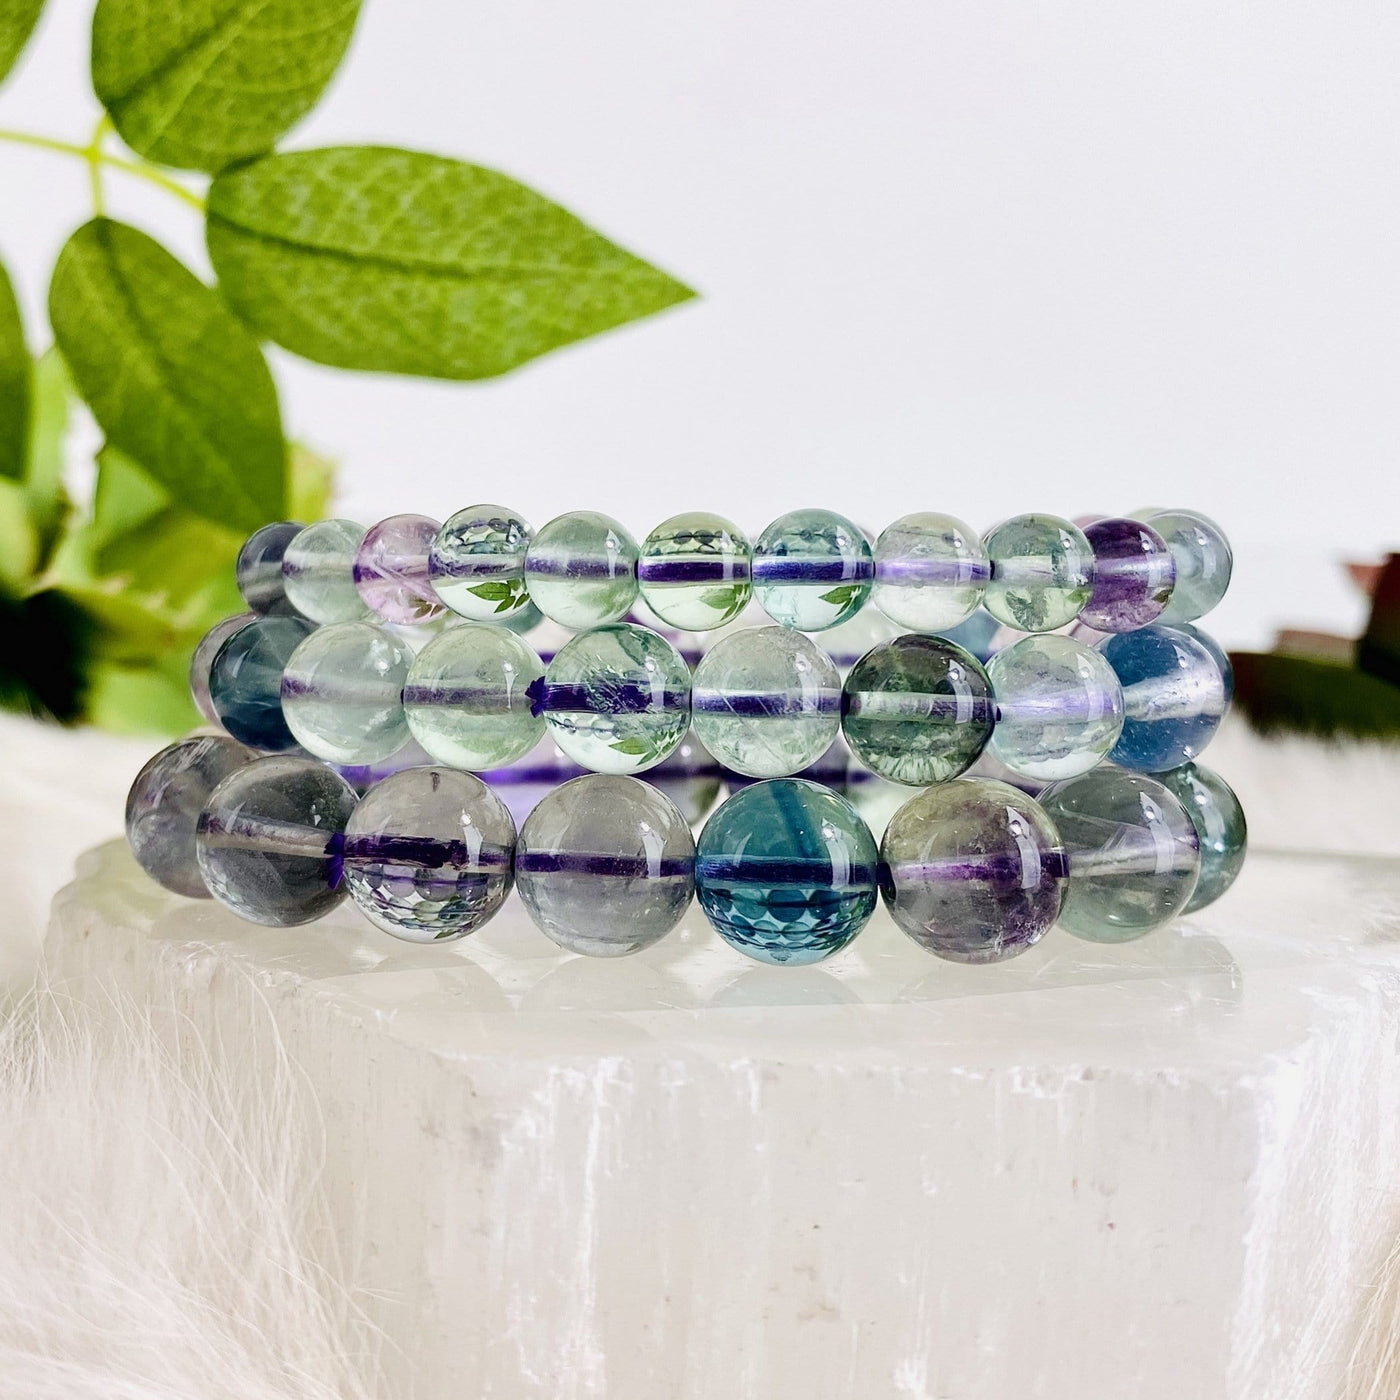 3 Rainbow Fluorite Round Bead Bracelets stacked on top of crystal quartz slab with white background